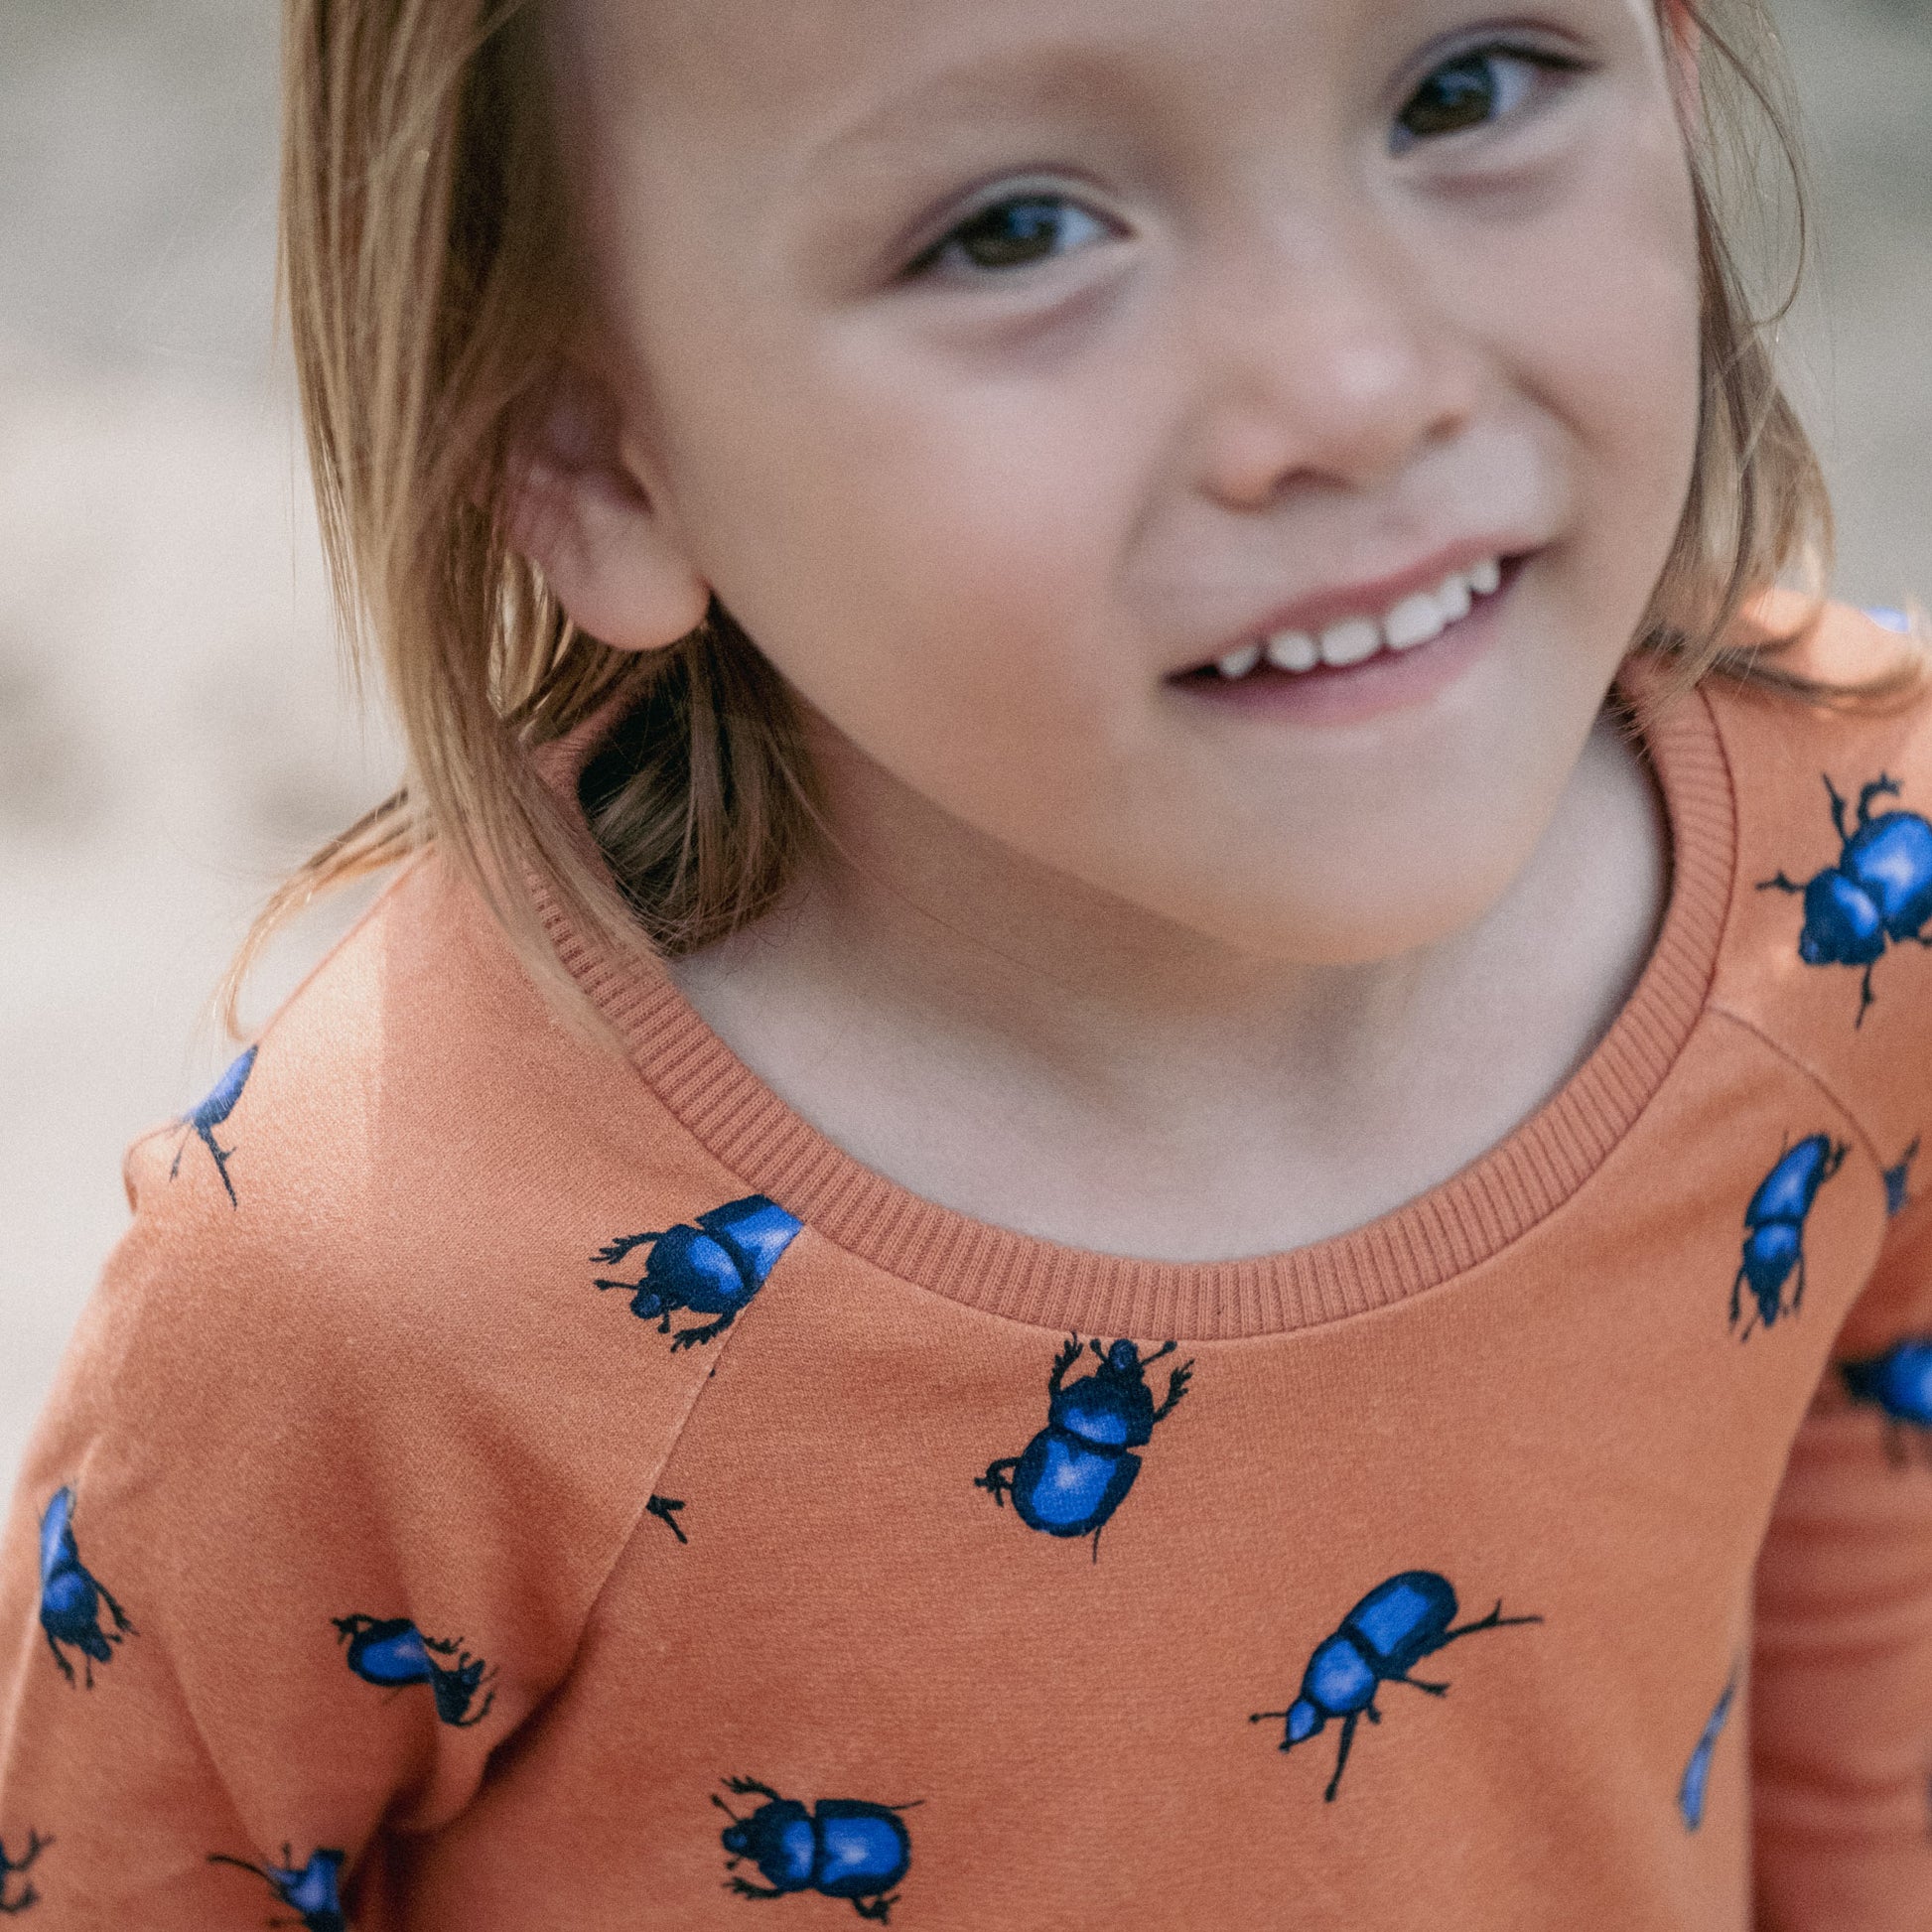 Child wearing an orange tunic with beetles on. Detail of the neckline.